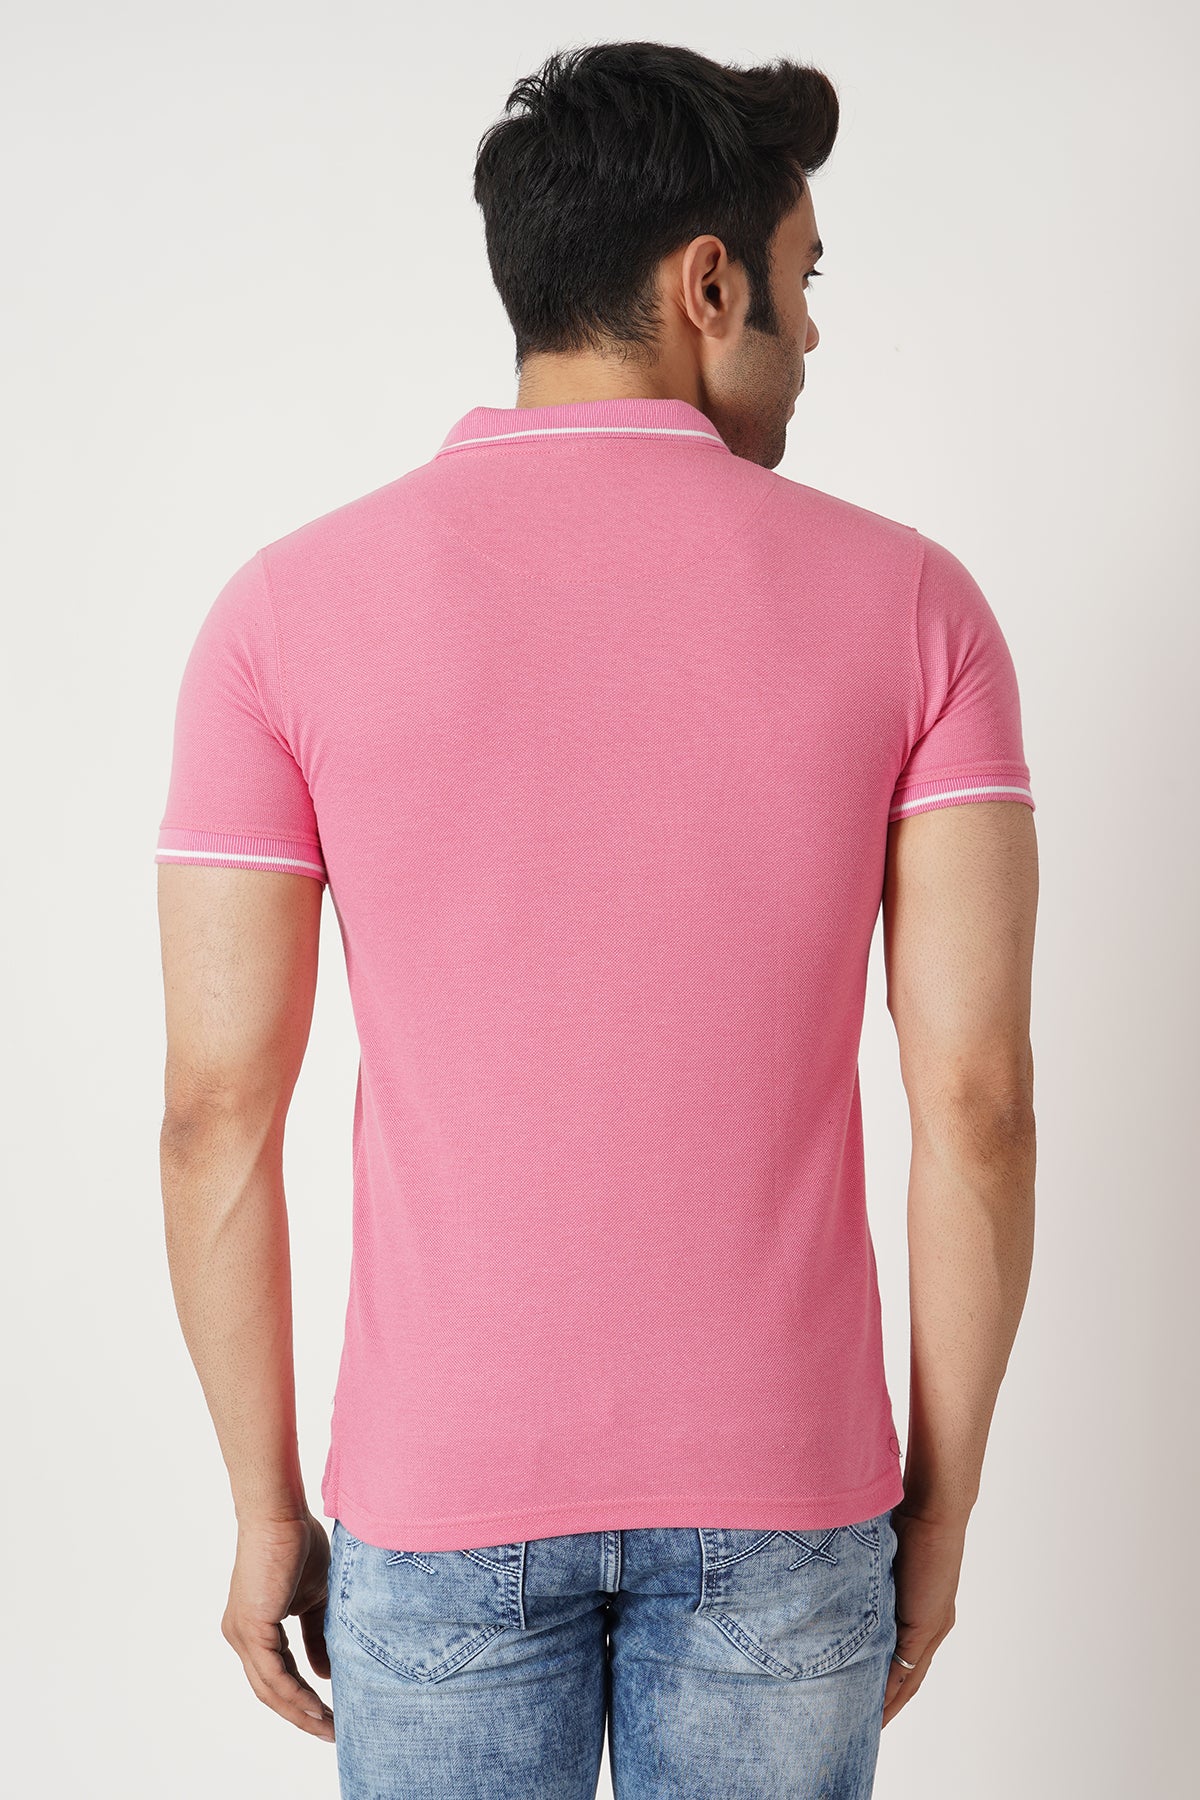 Solid Men Polo Neck Light Pink T-Shirt